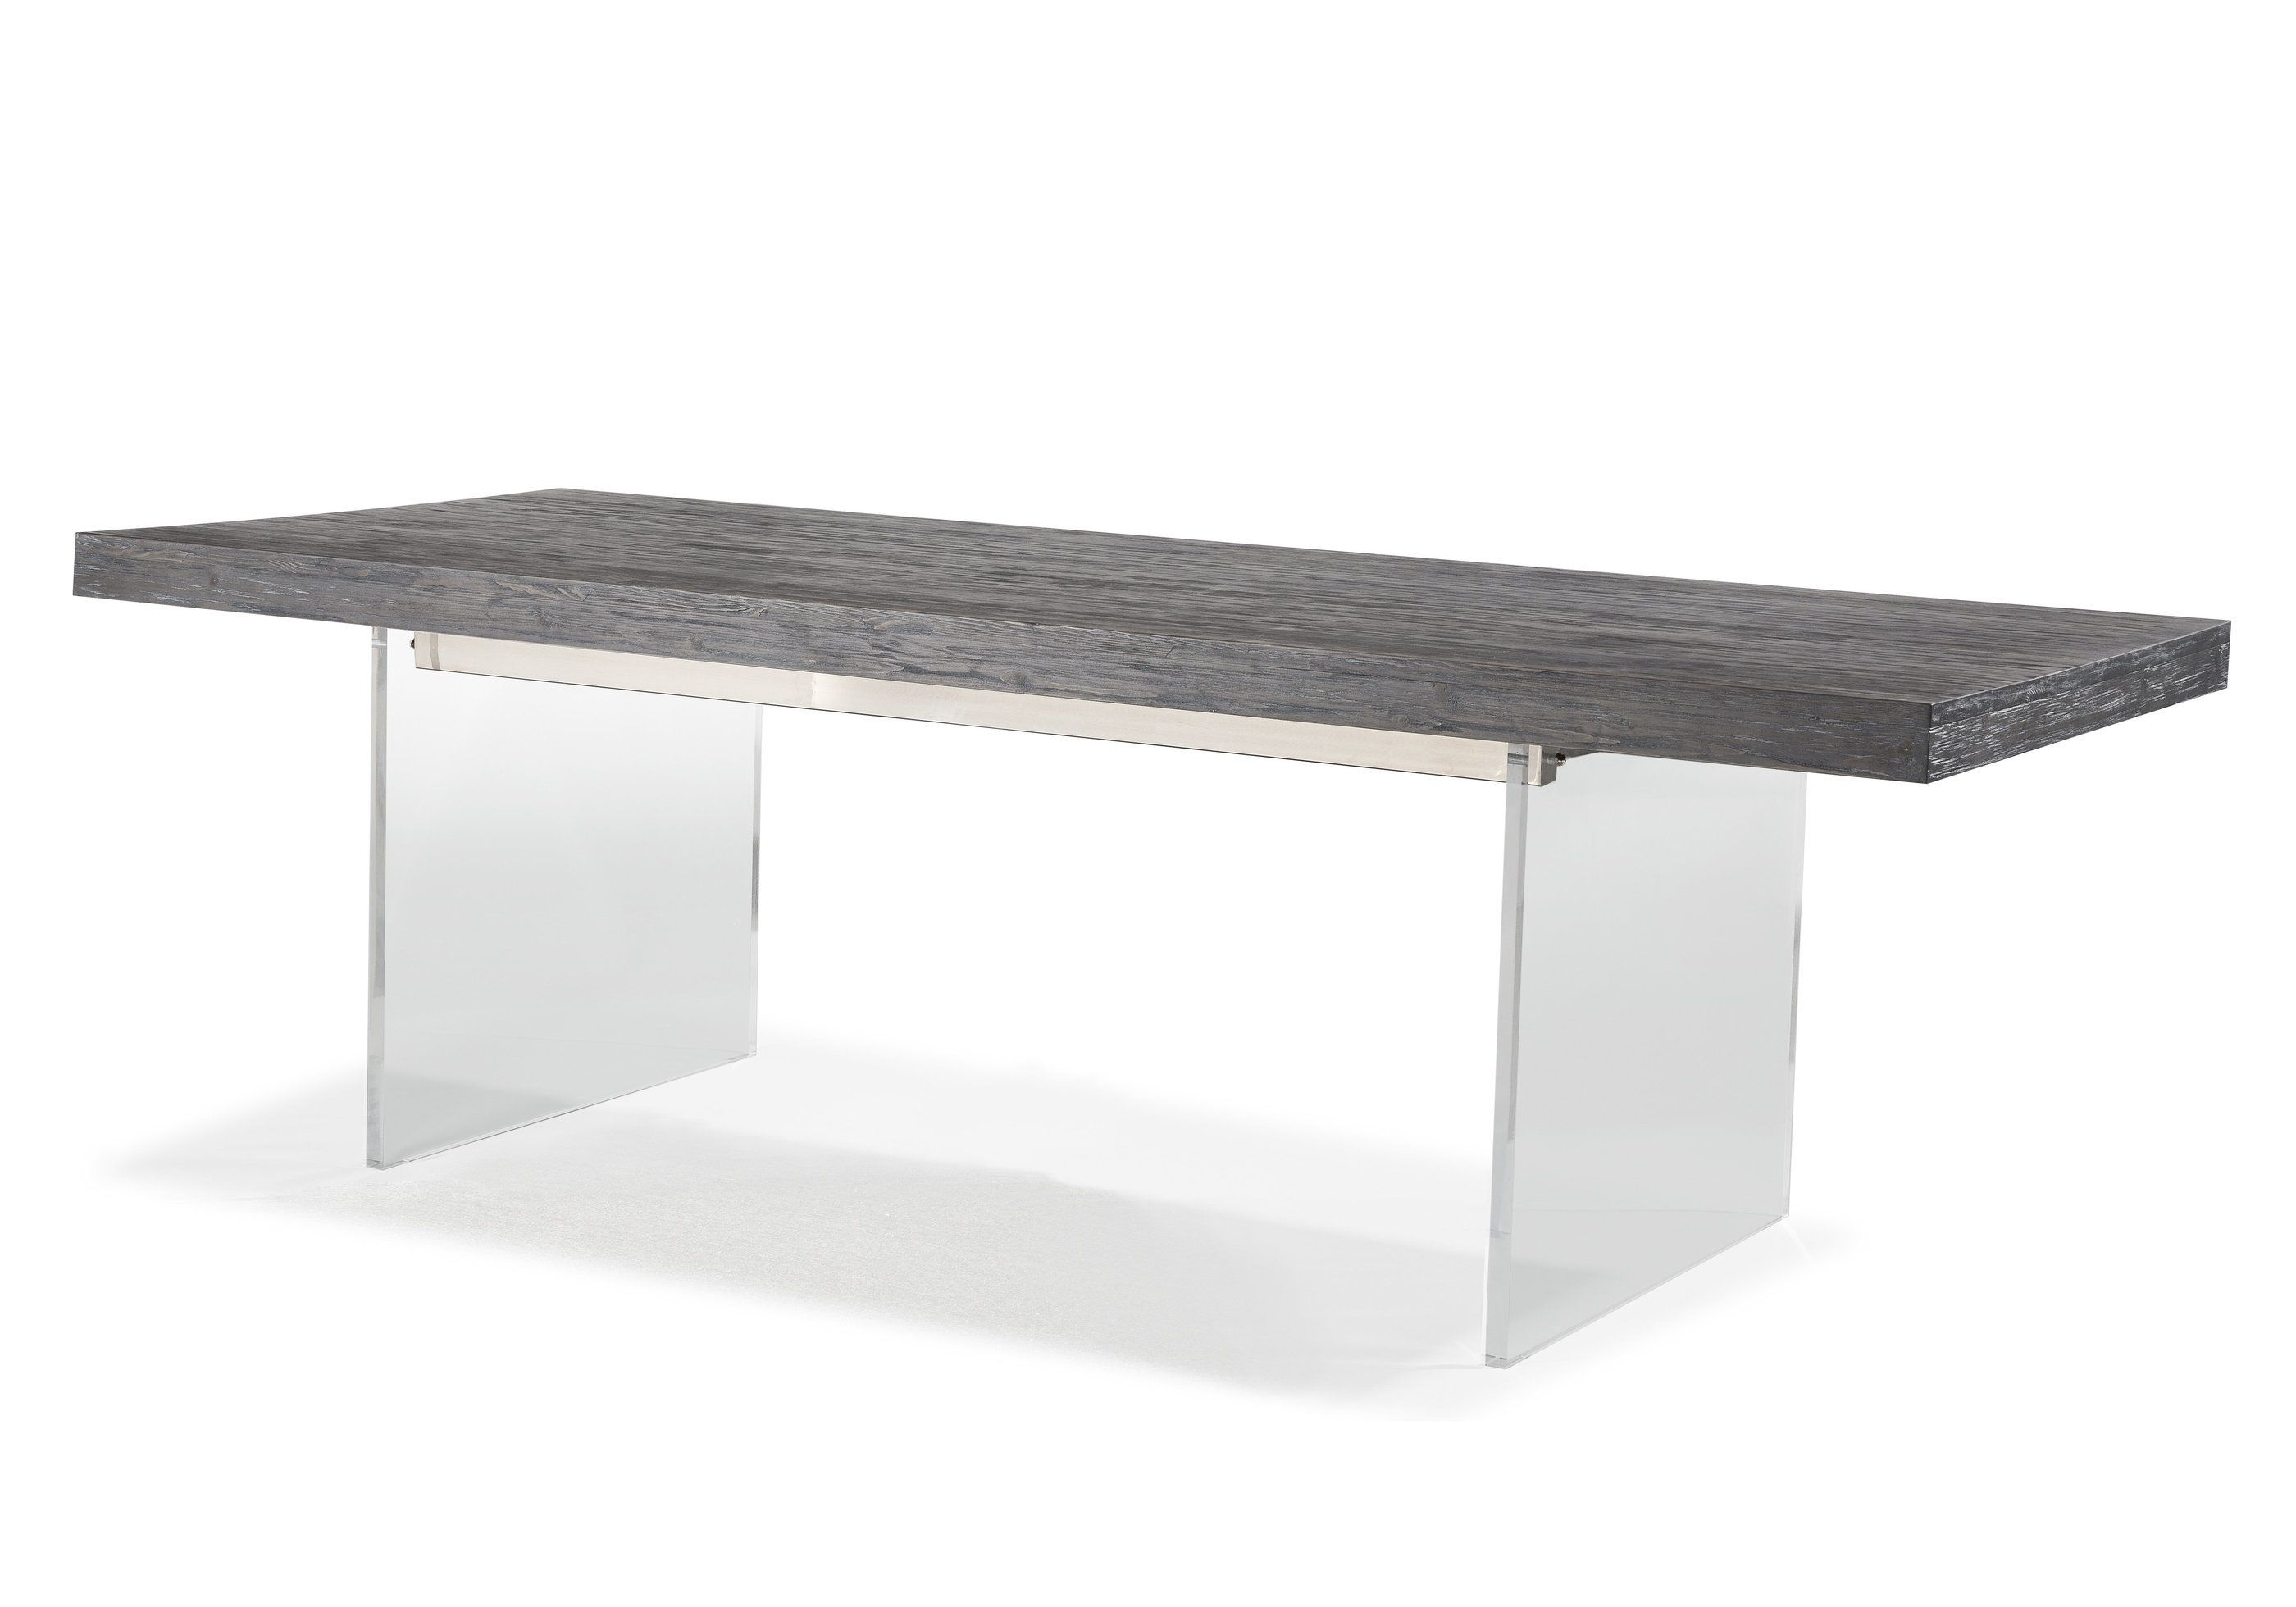 Bonneville Dining Table & Reviews | Allmodern With Latest Delfina Dining Tables (View 14 of 20)